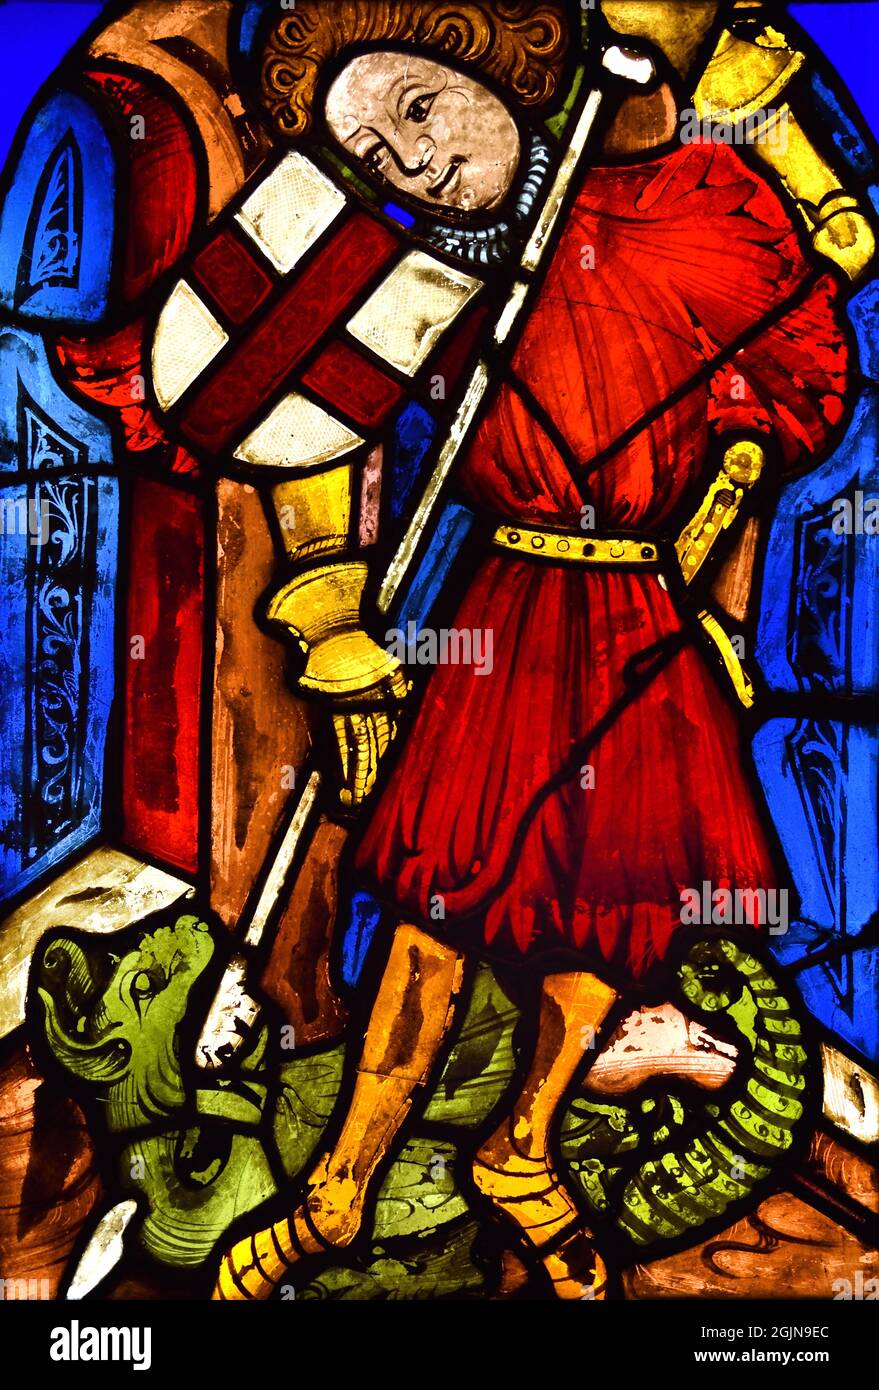 Saint George kills the dragon 1500 Cologne Germany, German, ( Seated on a horse, armed with a lance and with a cross for protection, he fought furiously and wounded the monster. George turned to the king and said he would kill the dragon on the condition that everyone convert to Christianity. ) Stock Photo